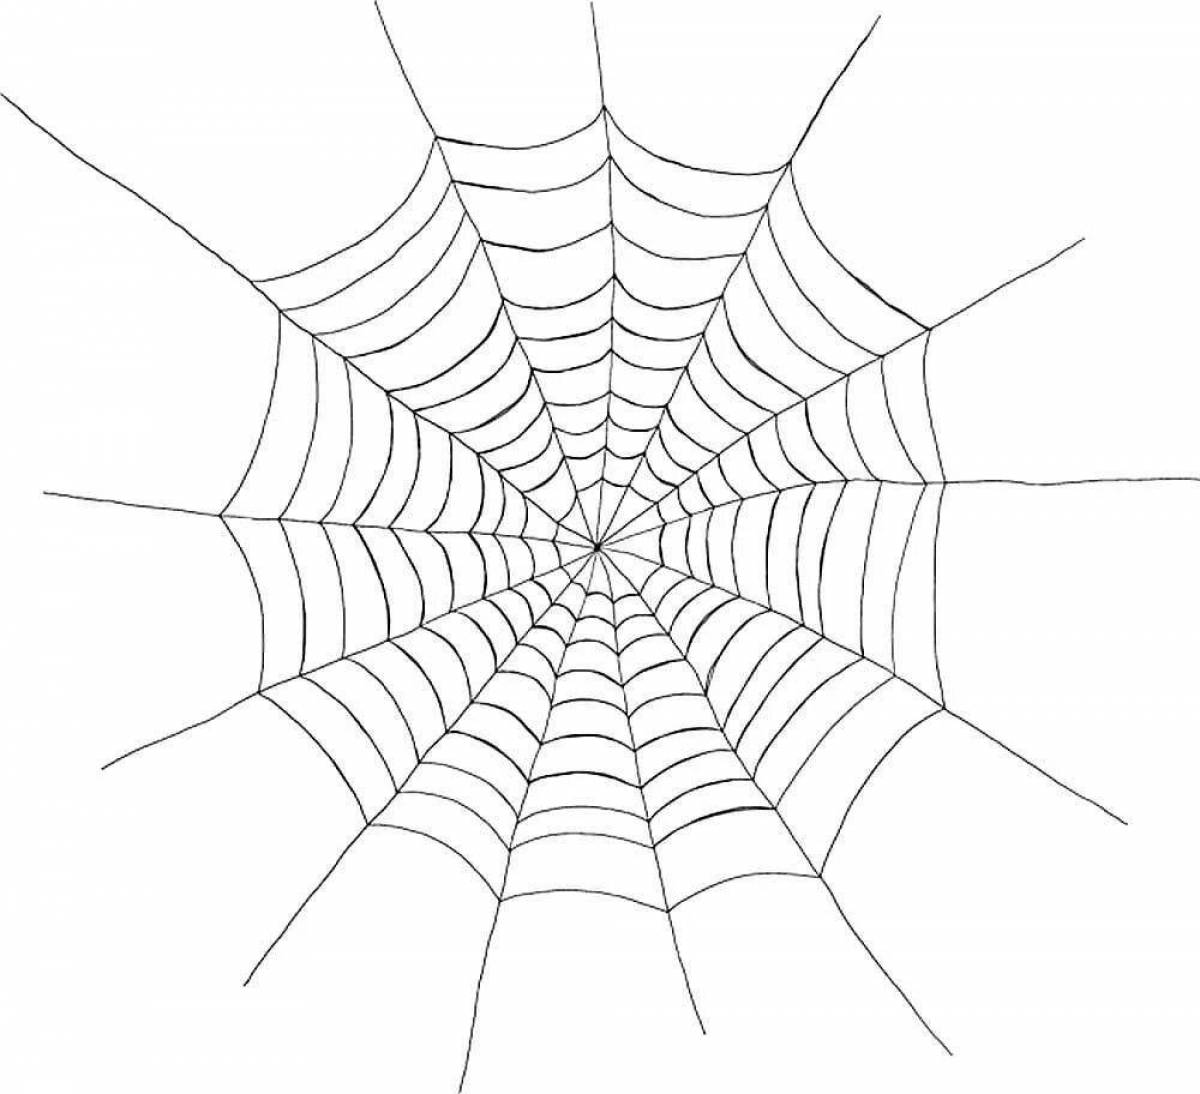 Coloring web for children